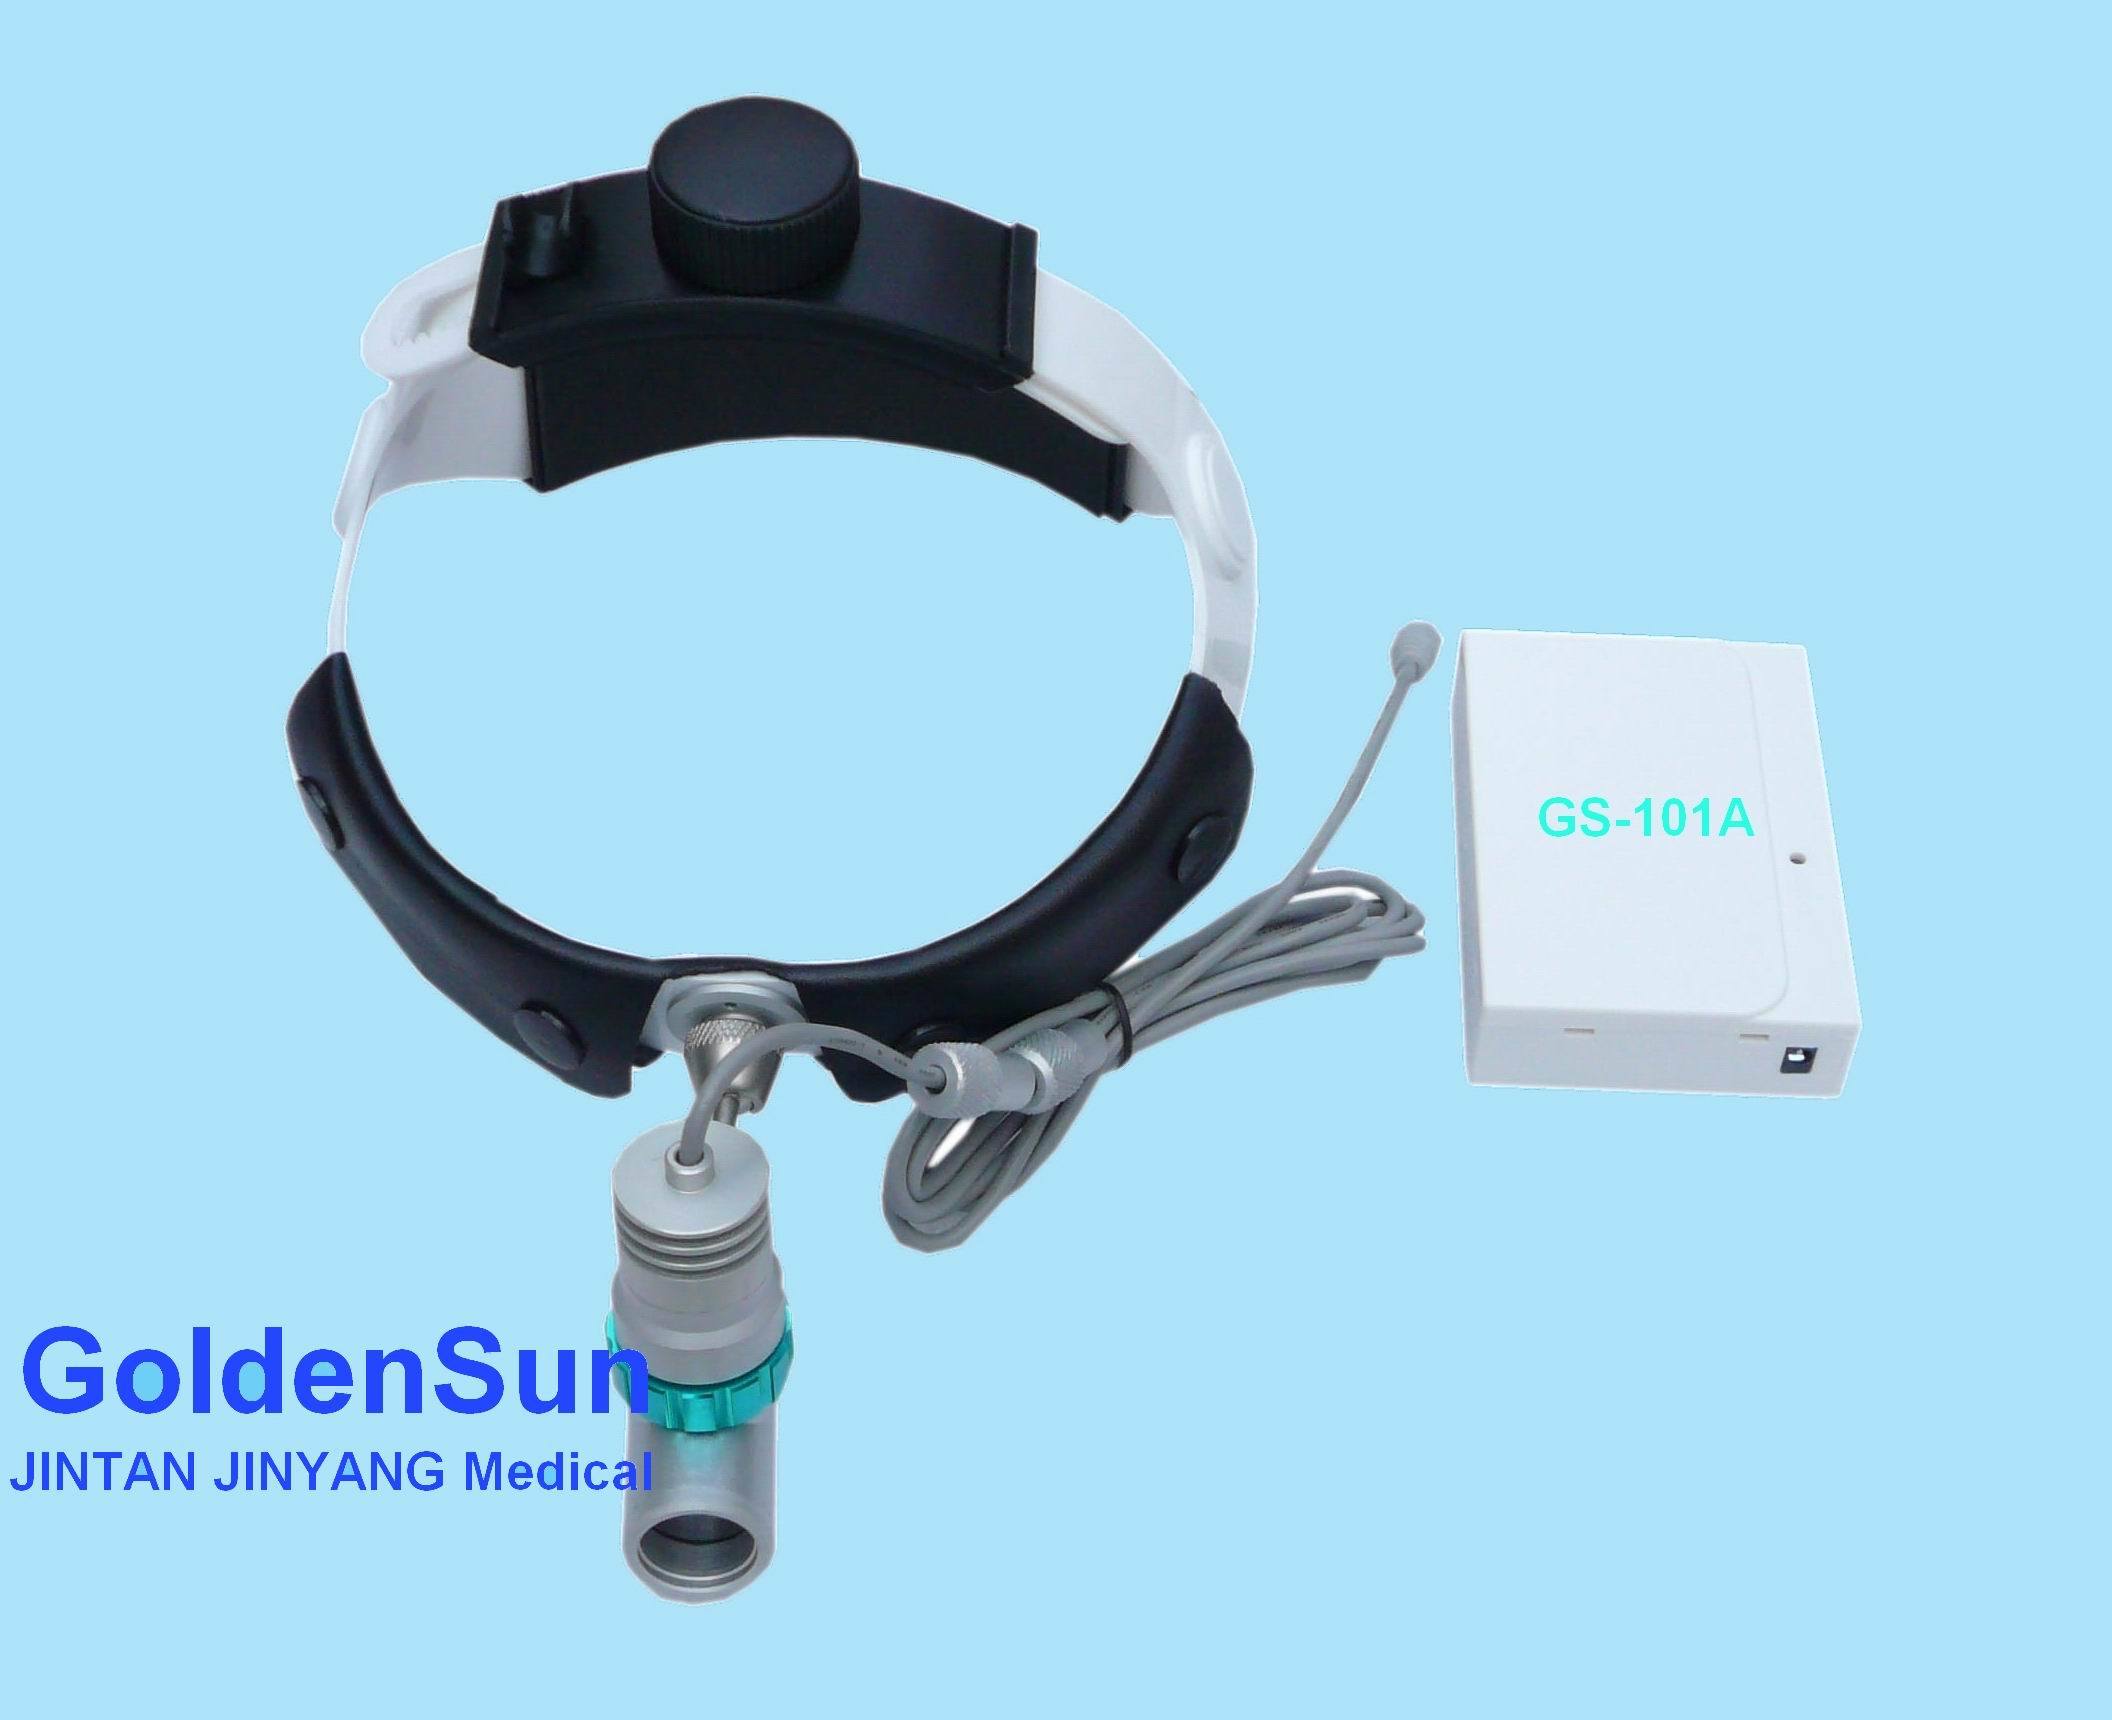 Surgical LED Headlight Headlamp with Rechargeable Battery